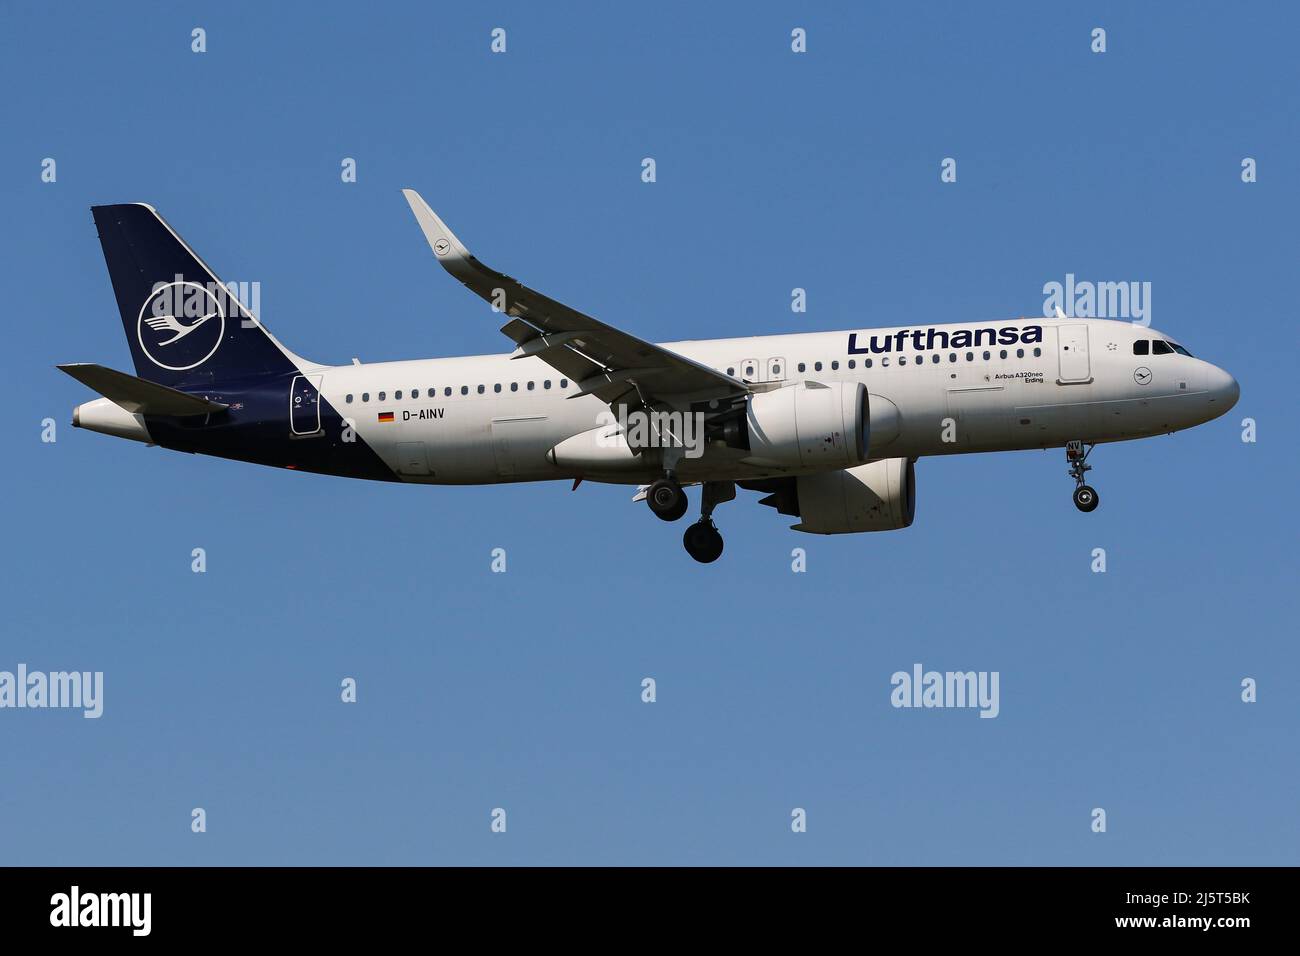 An Airbus A320 operated by Lufthansa arrives at London Heathrow Airport Stock Photo